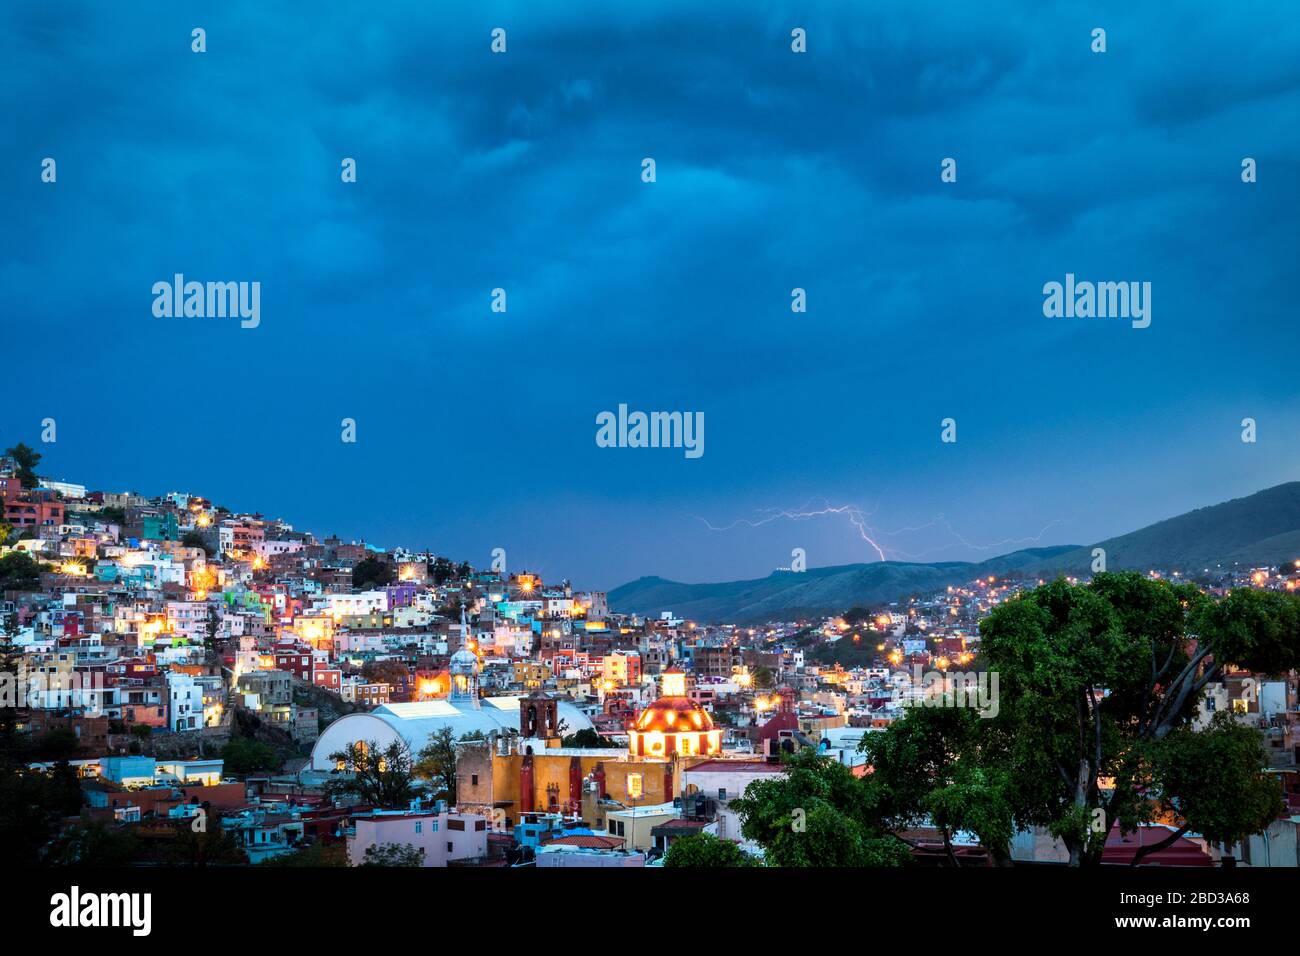 Lightning strikes in the distance over colonial Guanajuato, Mexico. Stock Photo